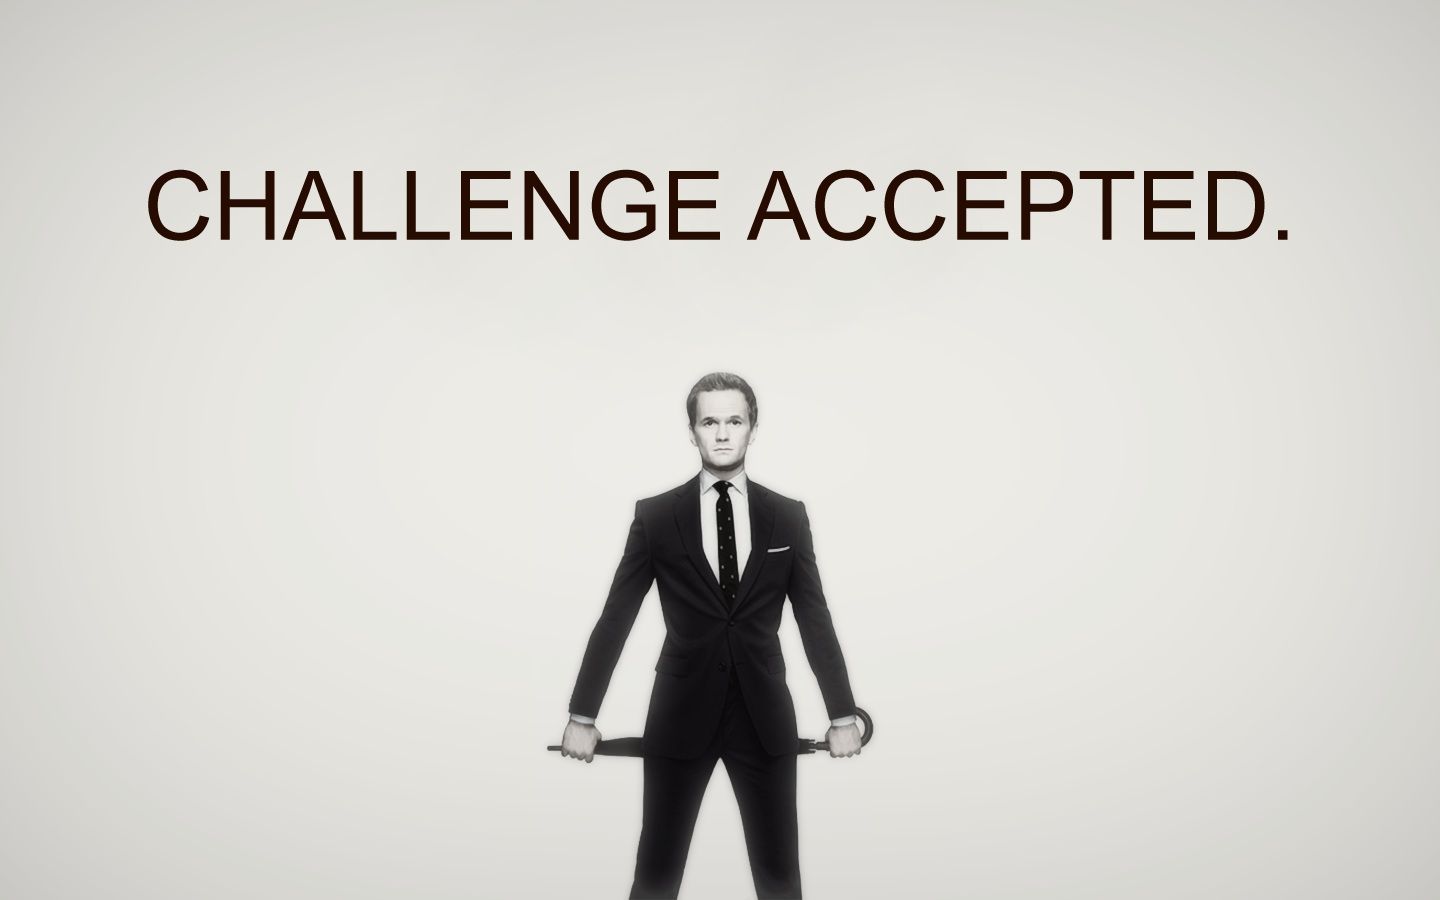 challenge-accepted-wallpapers_31078_1440x900.jpg